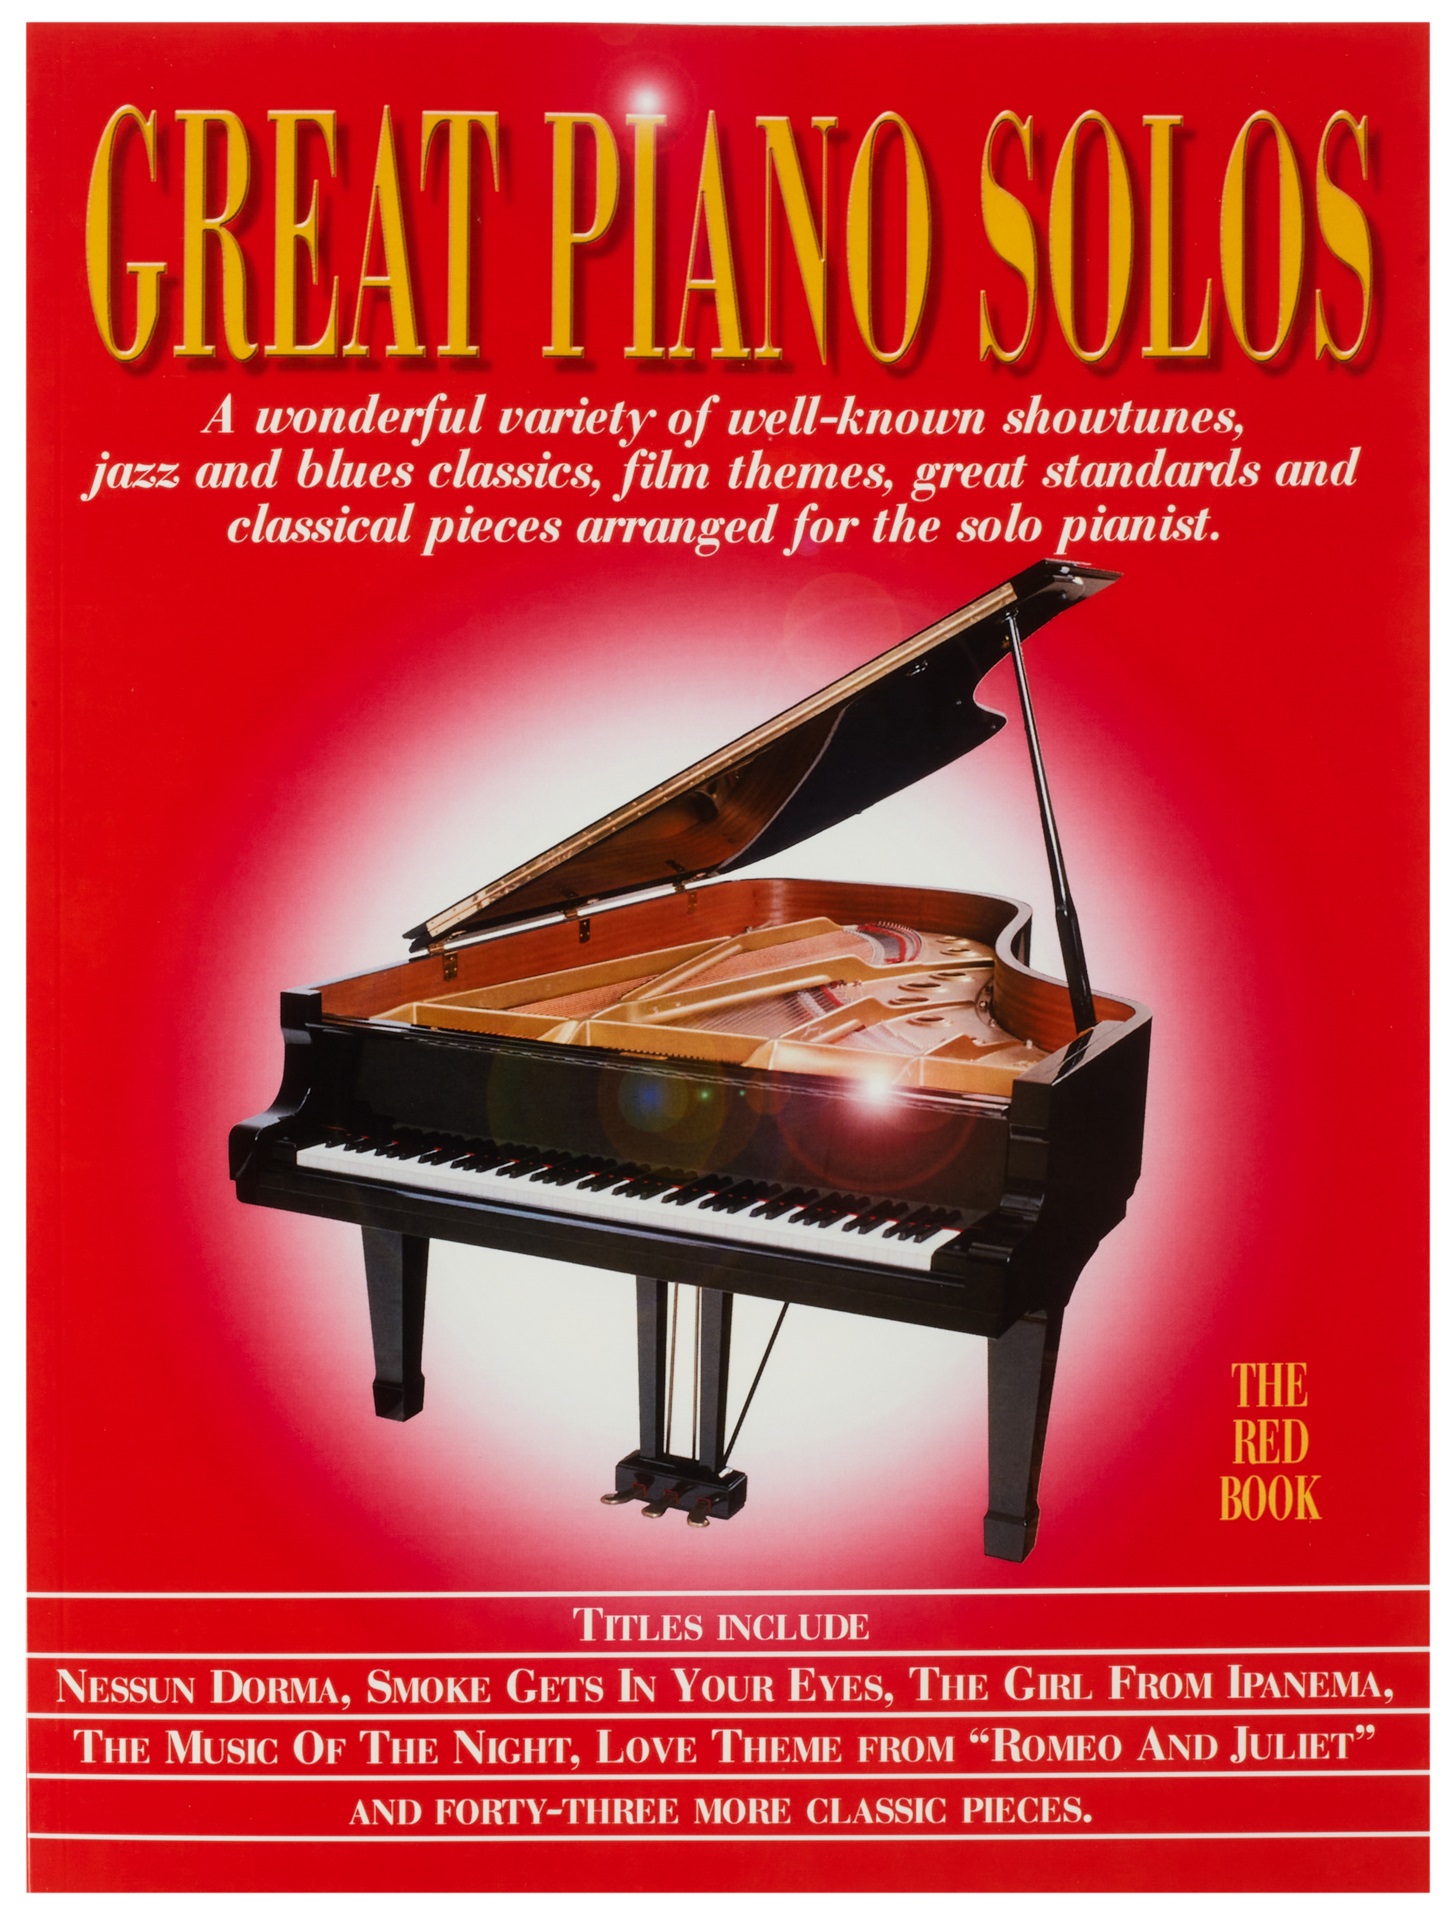 MS Great Piano Solos - The Red Book